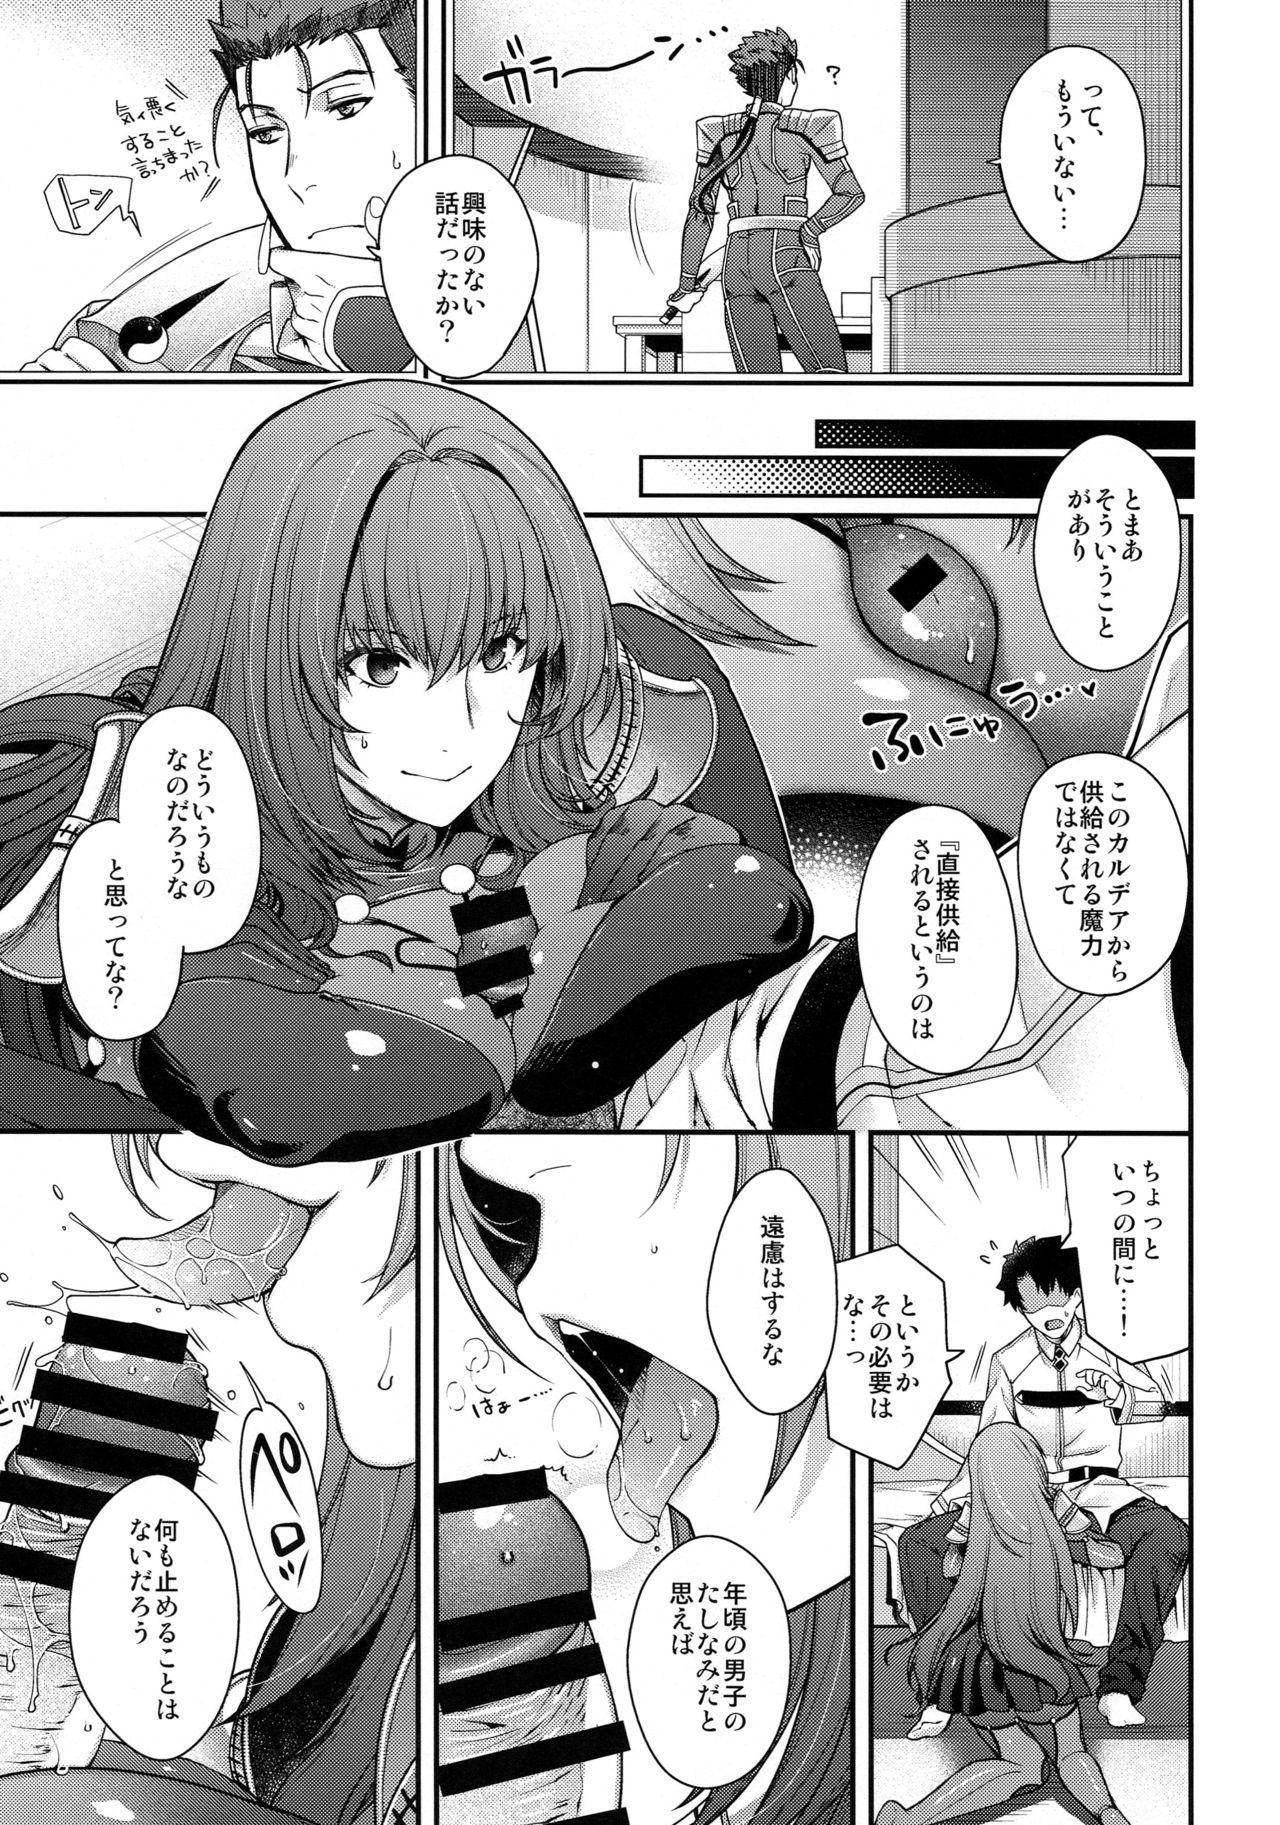 Squirt parthas - Fate grand order Face Fucking - Page 6